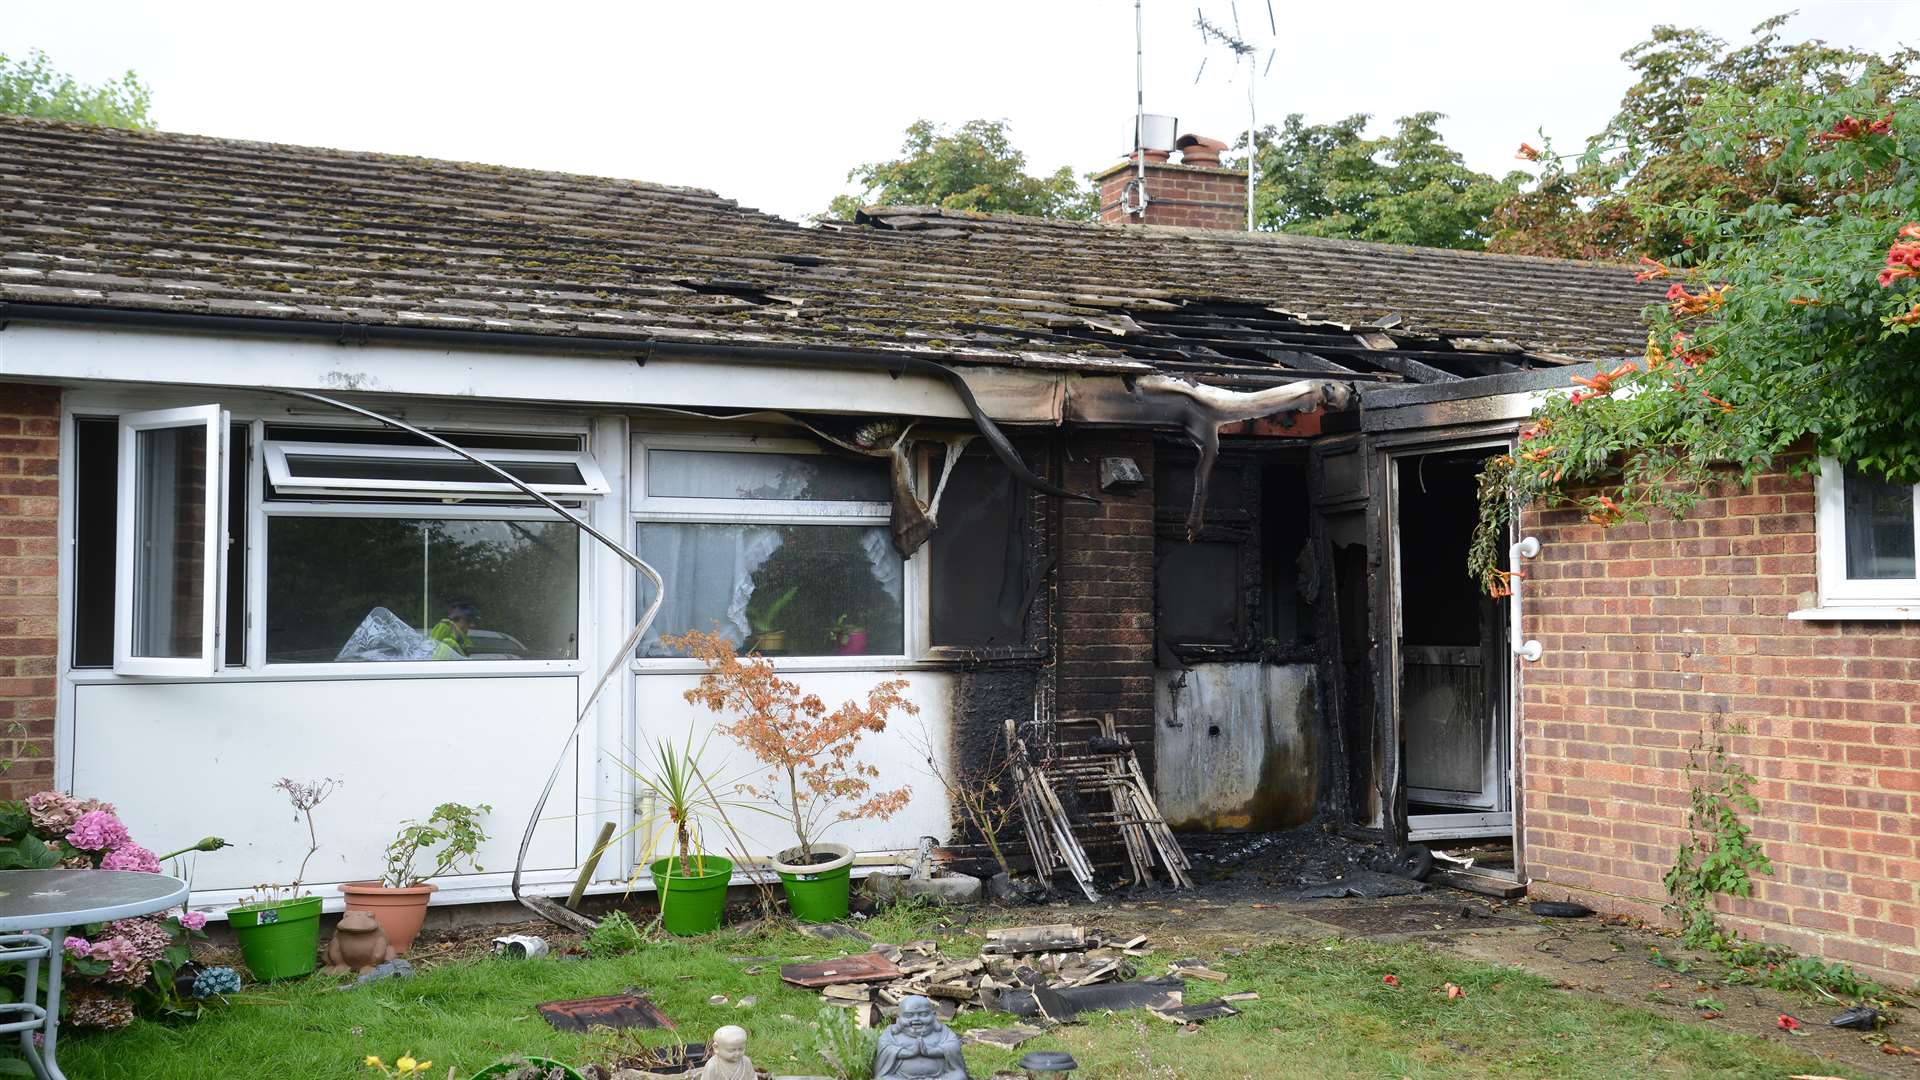 Scene of the fire damaged bungalow in Goldwell Close. Pic by Gary Browne